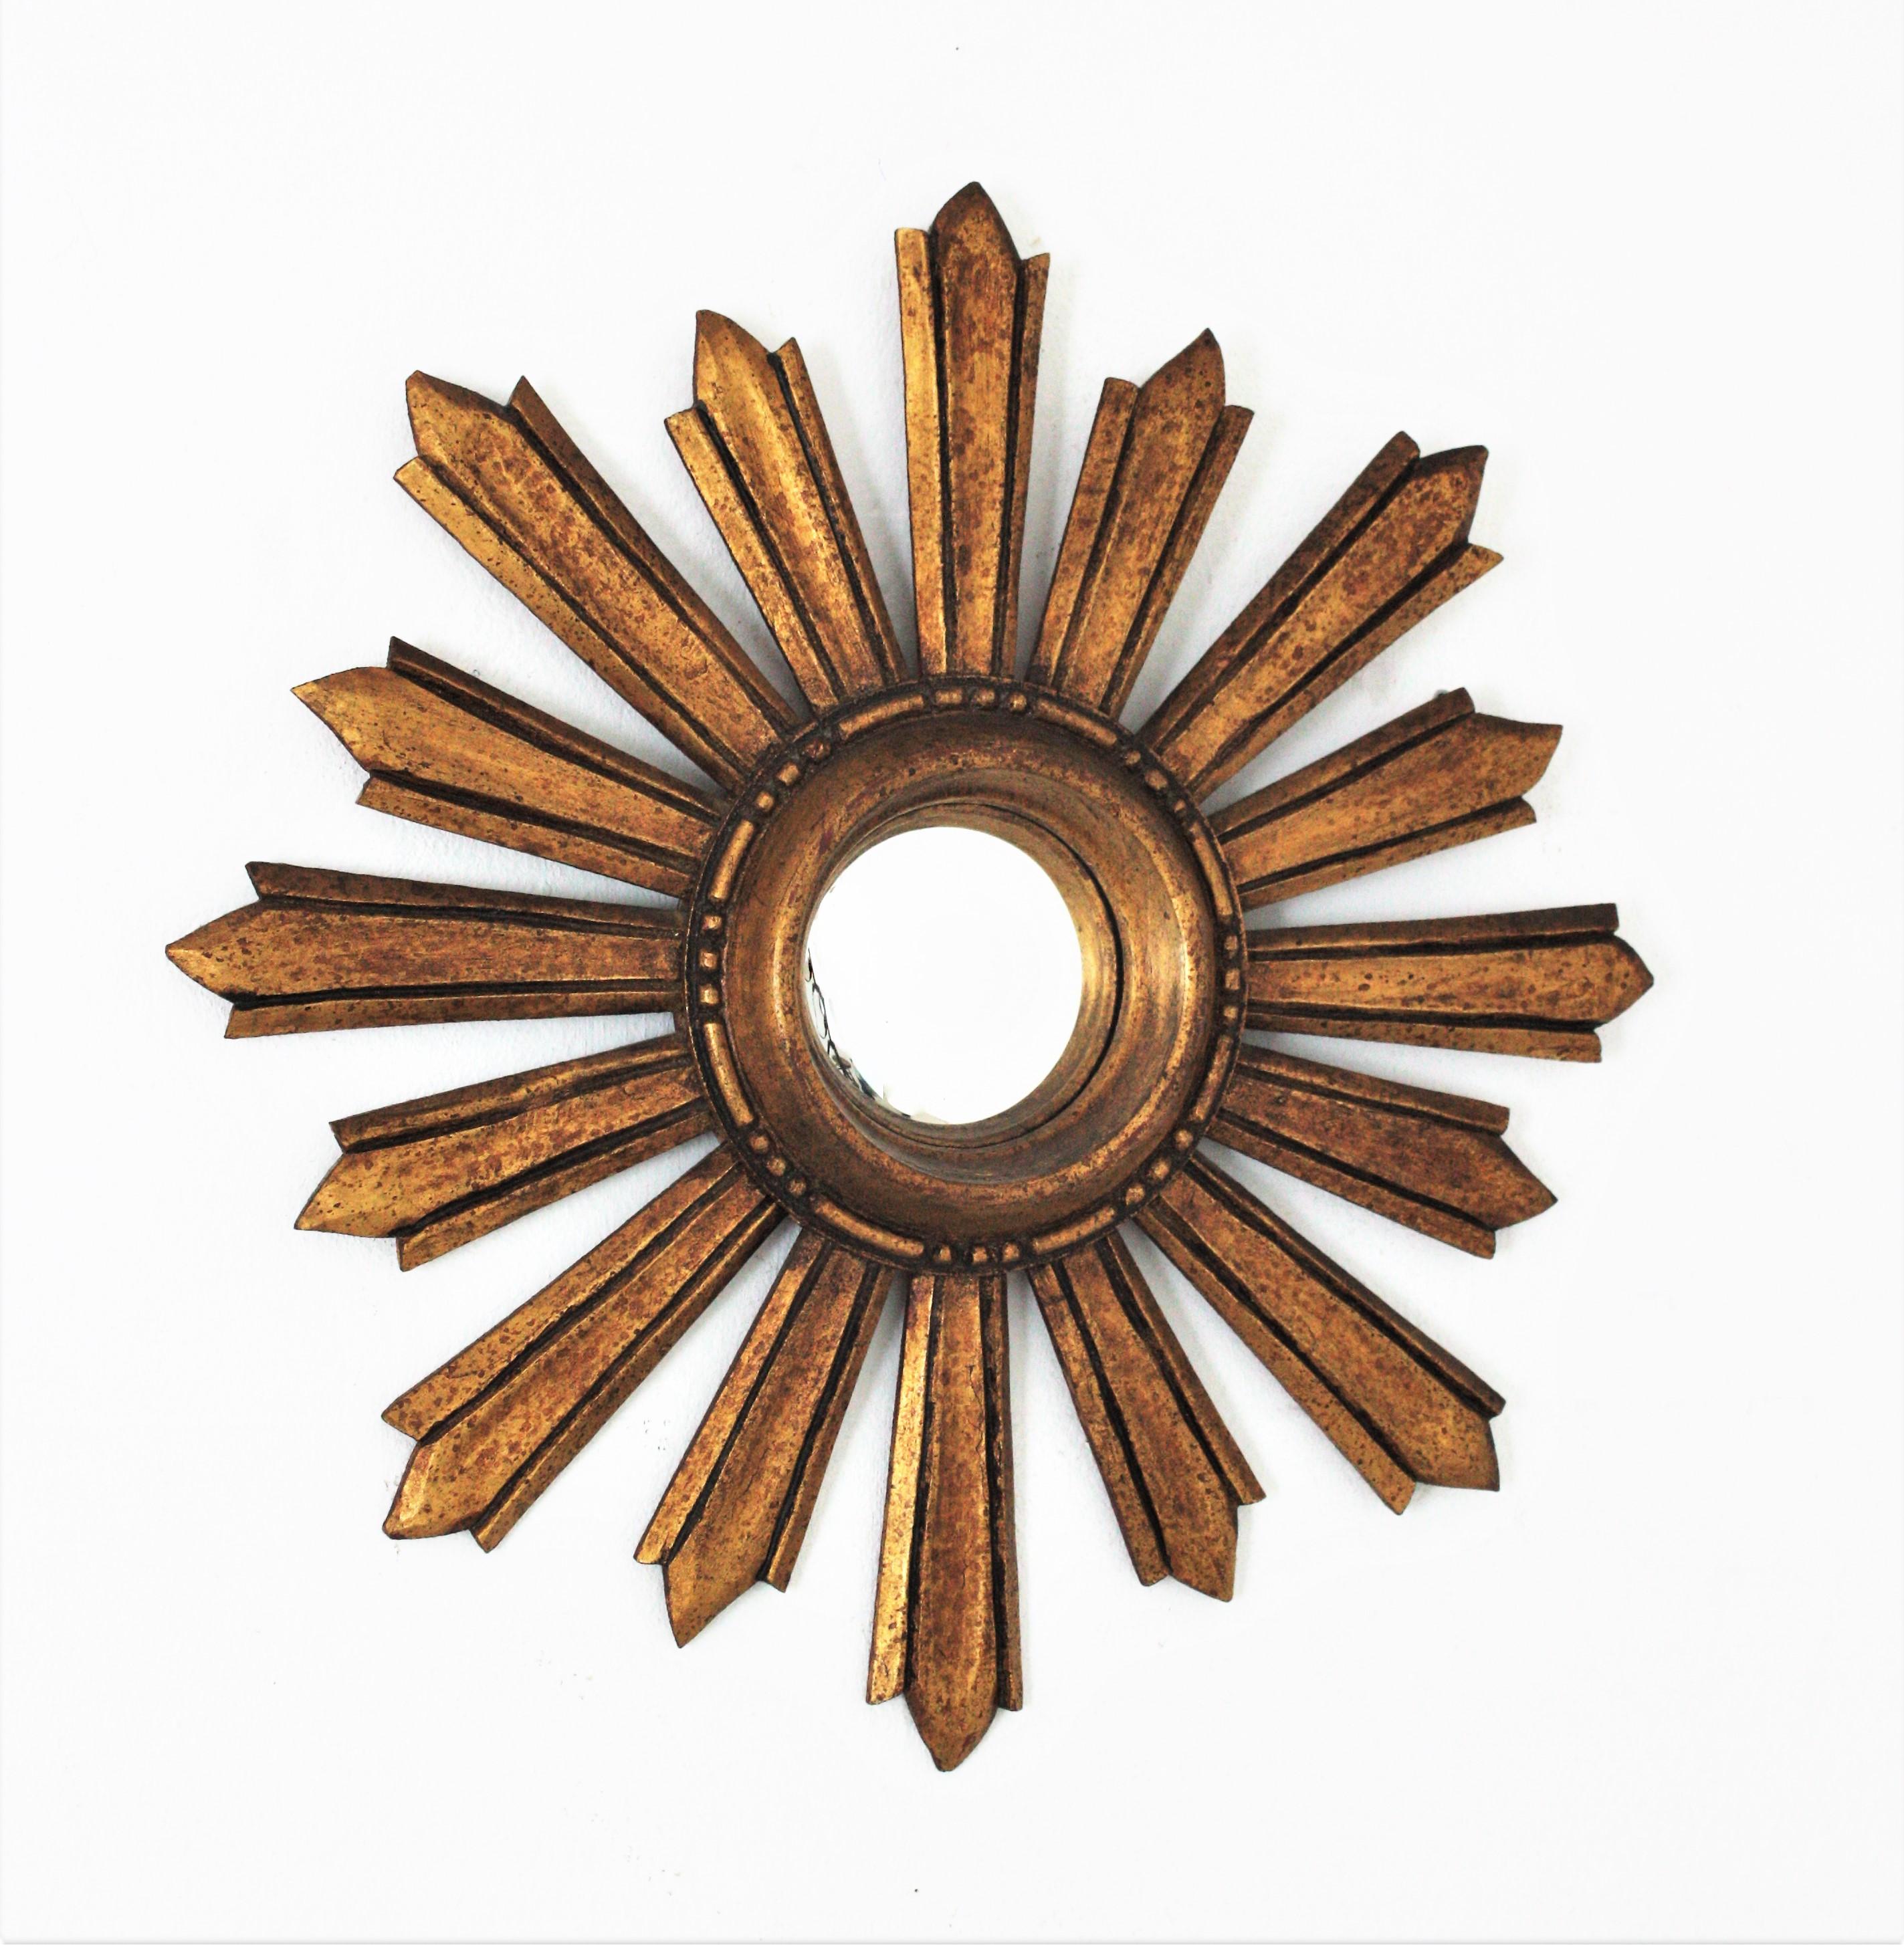 Sunburst convex mirror, giltwood, gold leaf, France, 1940s.
Gorgeous gold leaf gilt carved wood sunburst mirror with convex glass. It has a terrific patina showing its original gold leaf gilding.
Beautiful placed alone or as a part of a wall